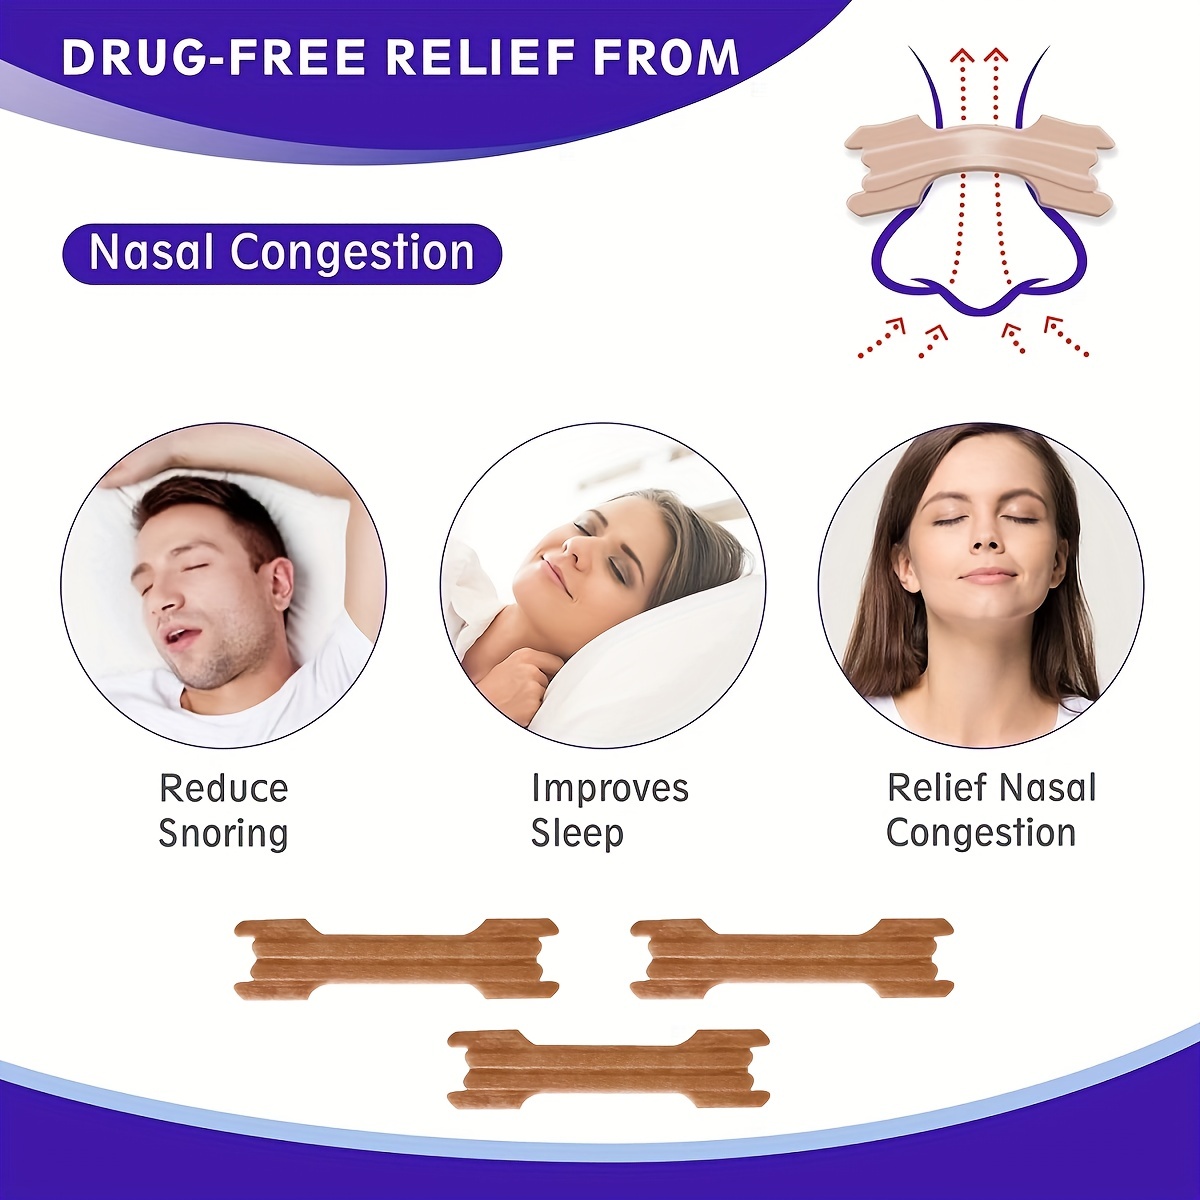 10 Nasal Strips Reviewed To Help You Sleep Better And Stop Snoring